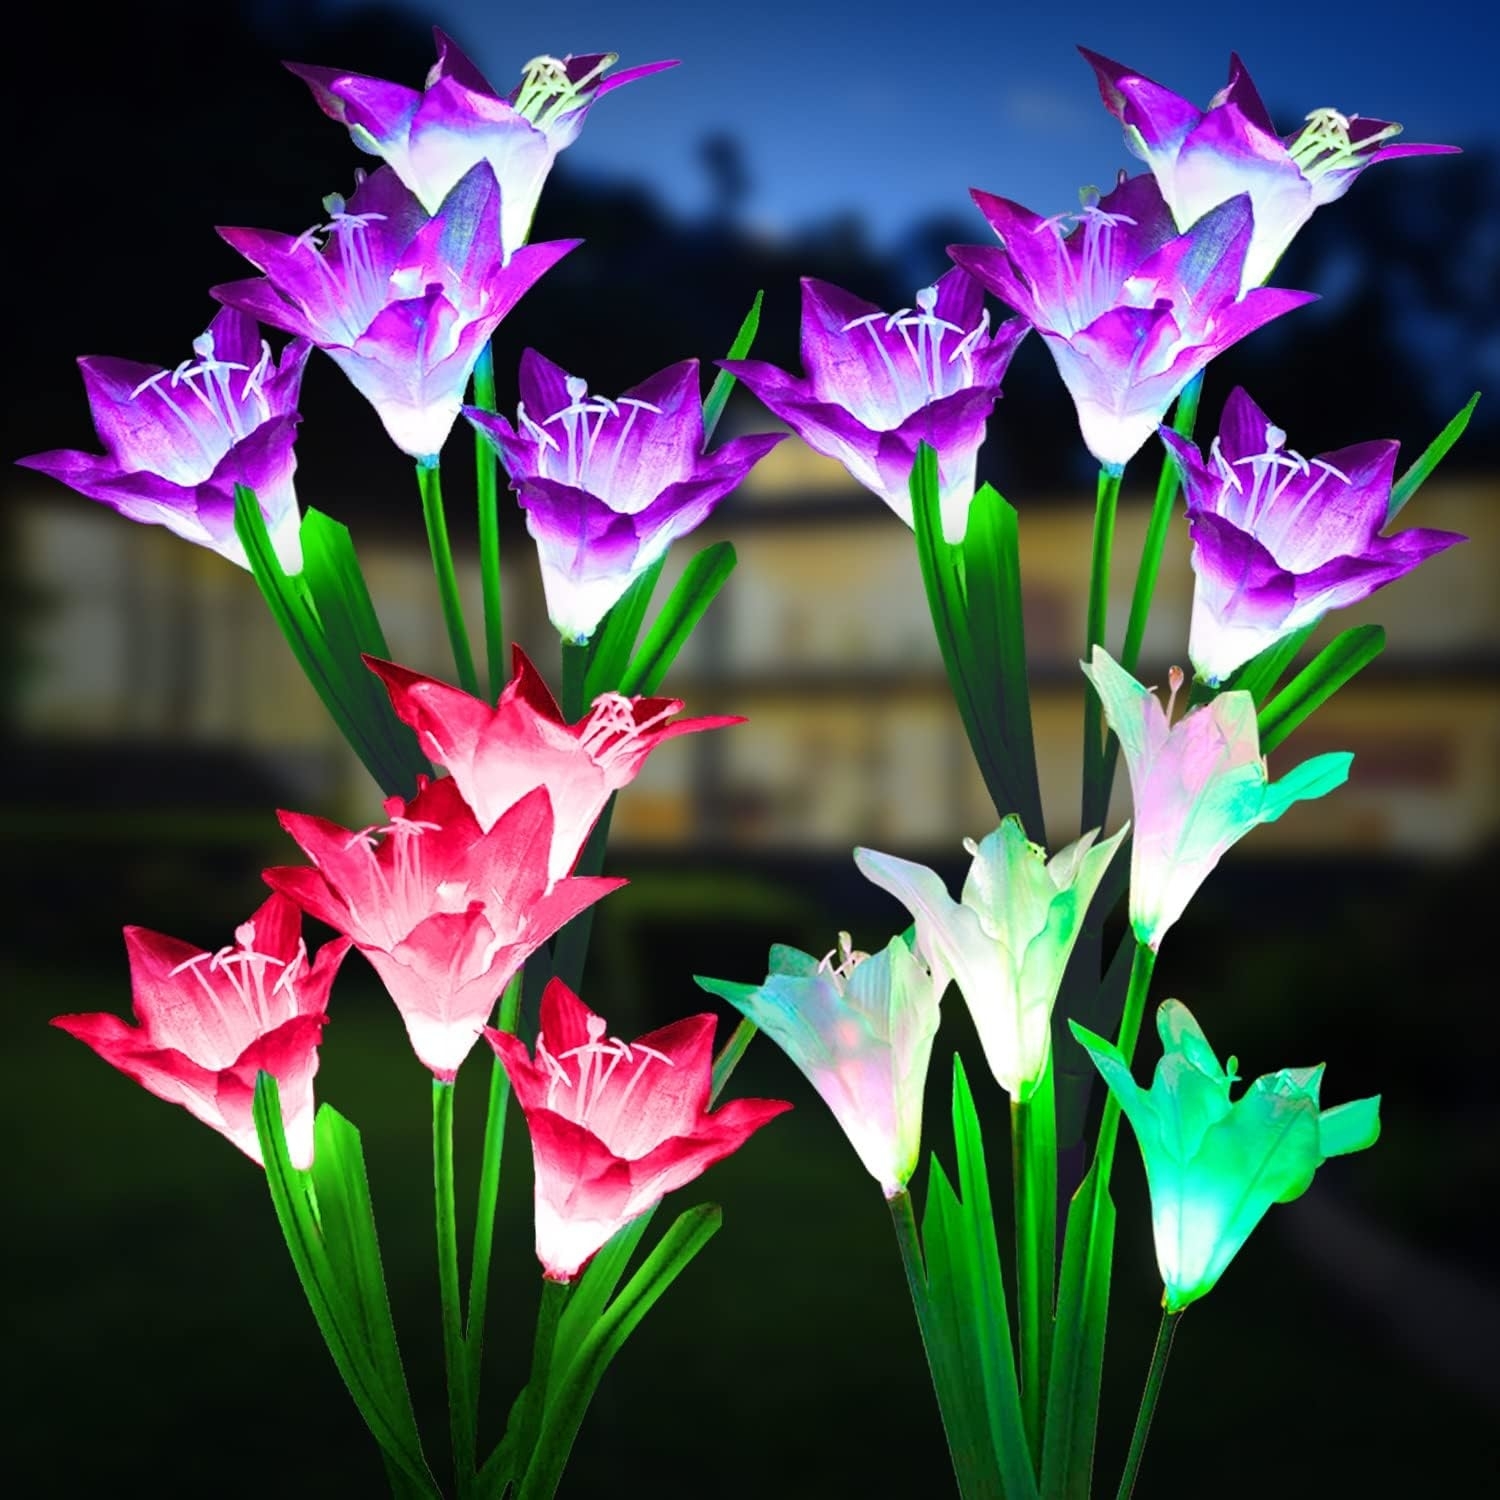 Solar-powered garden lights shaped like various colored lilies, displayed at night